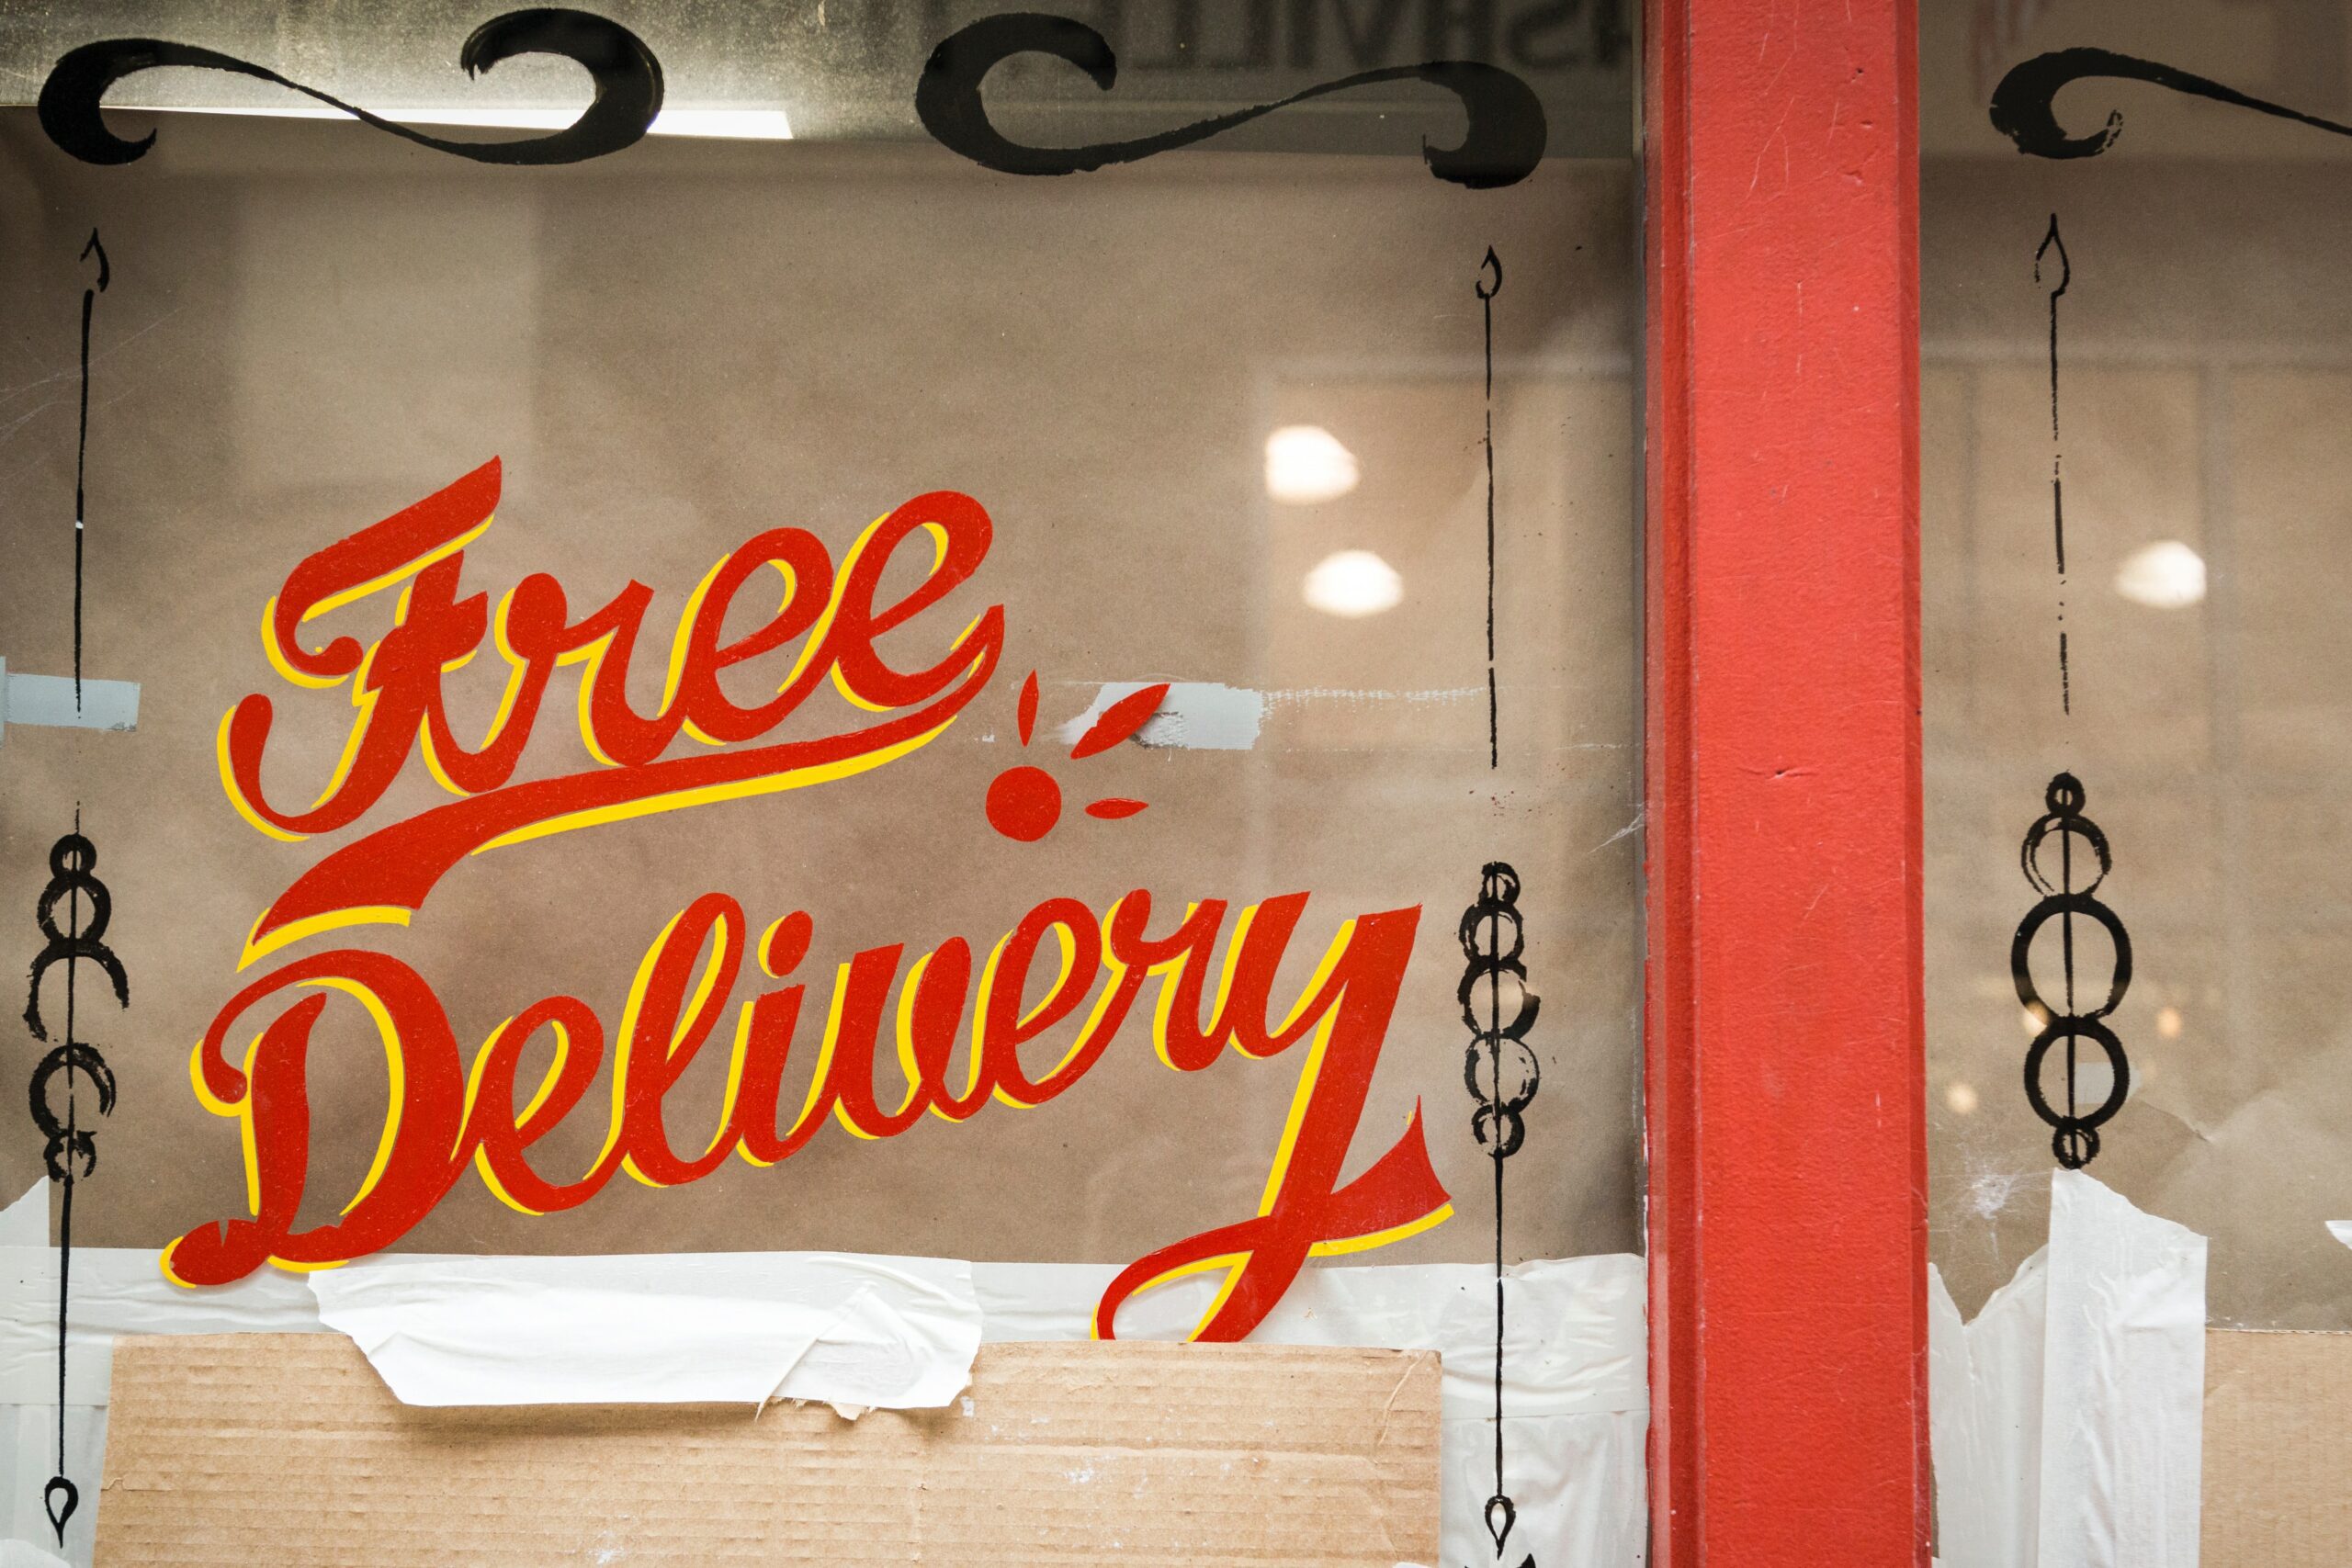 a free delivery sign in a store window